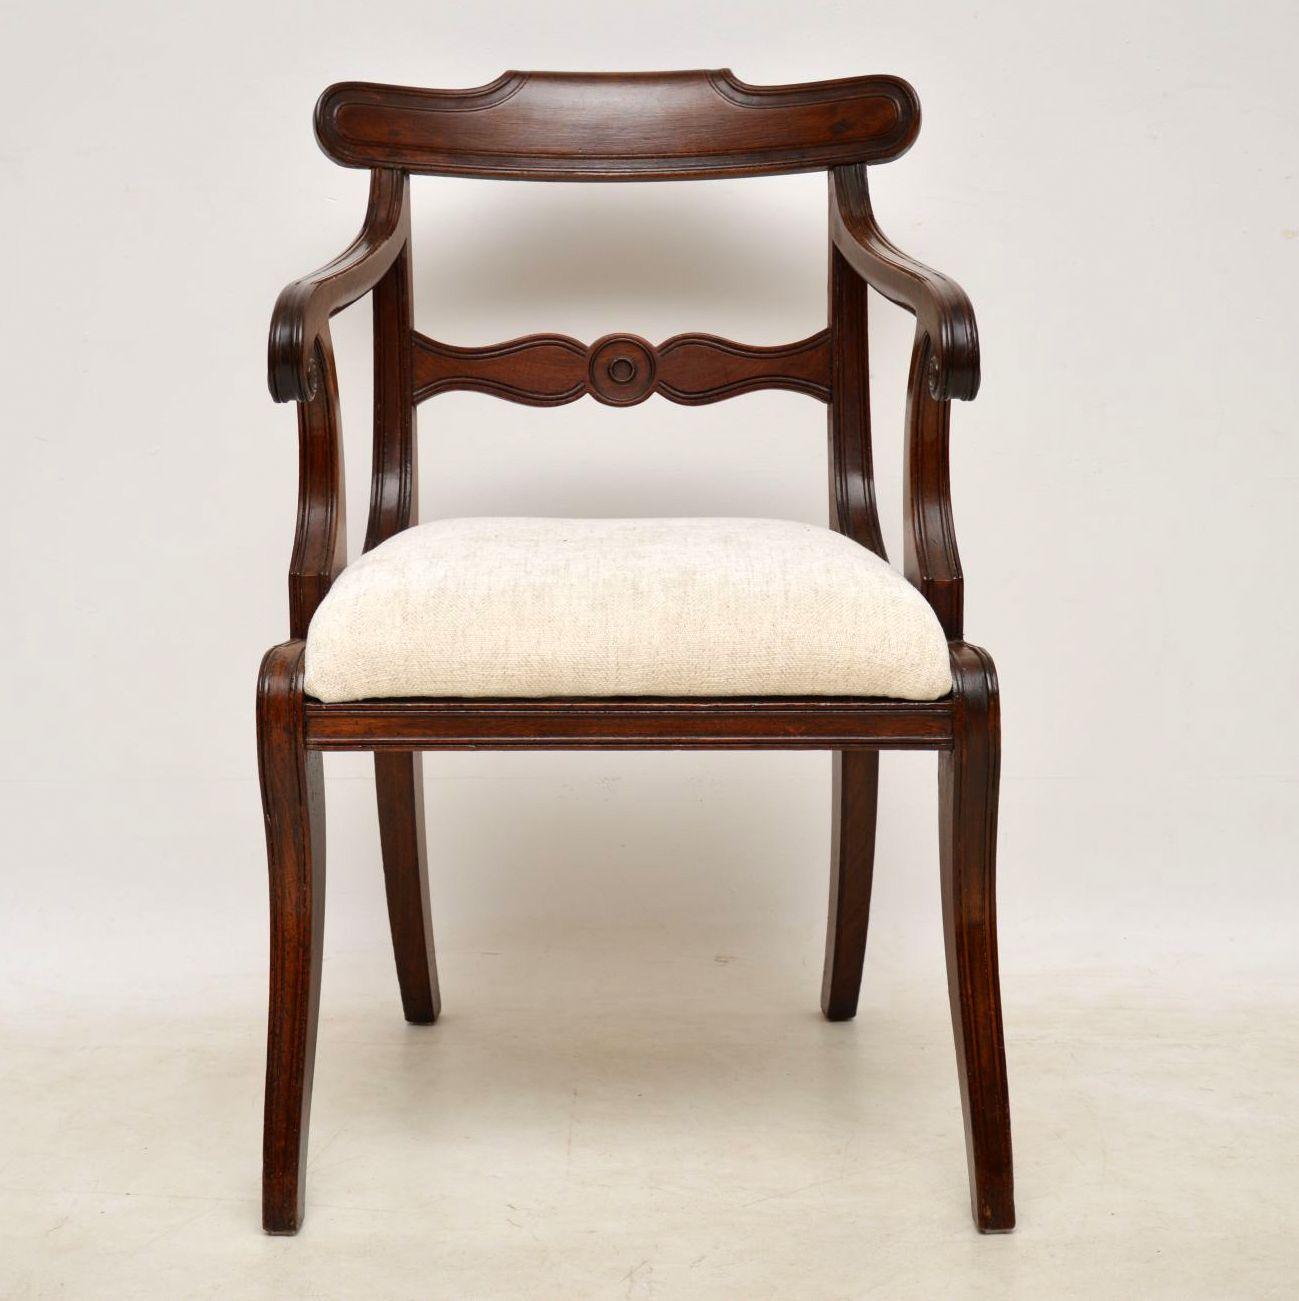 Antique Regency mahogany armchair dating from the 1820s period and in good condition. It’s recently been polished and the drop in seat has been re-upholstered. This chair has a curved back, scroll over arms and front sabre legs. I find these chairs